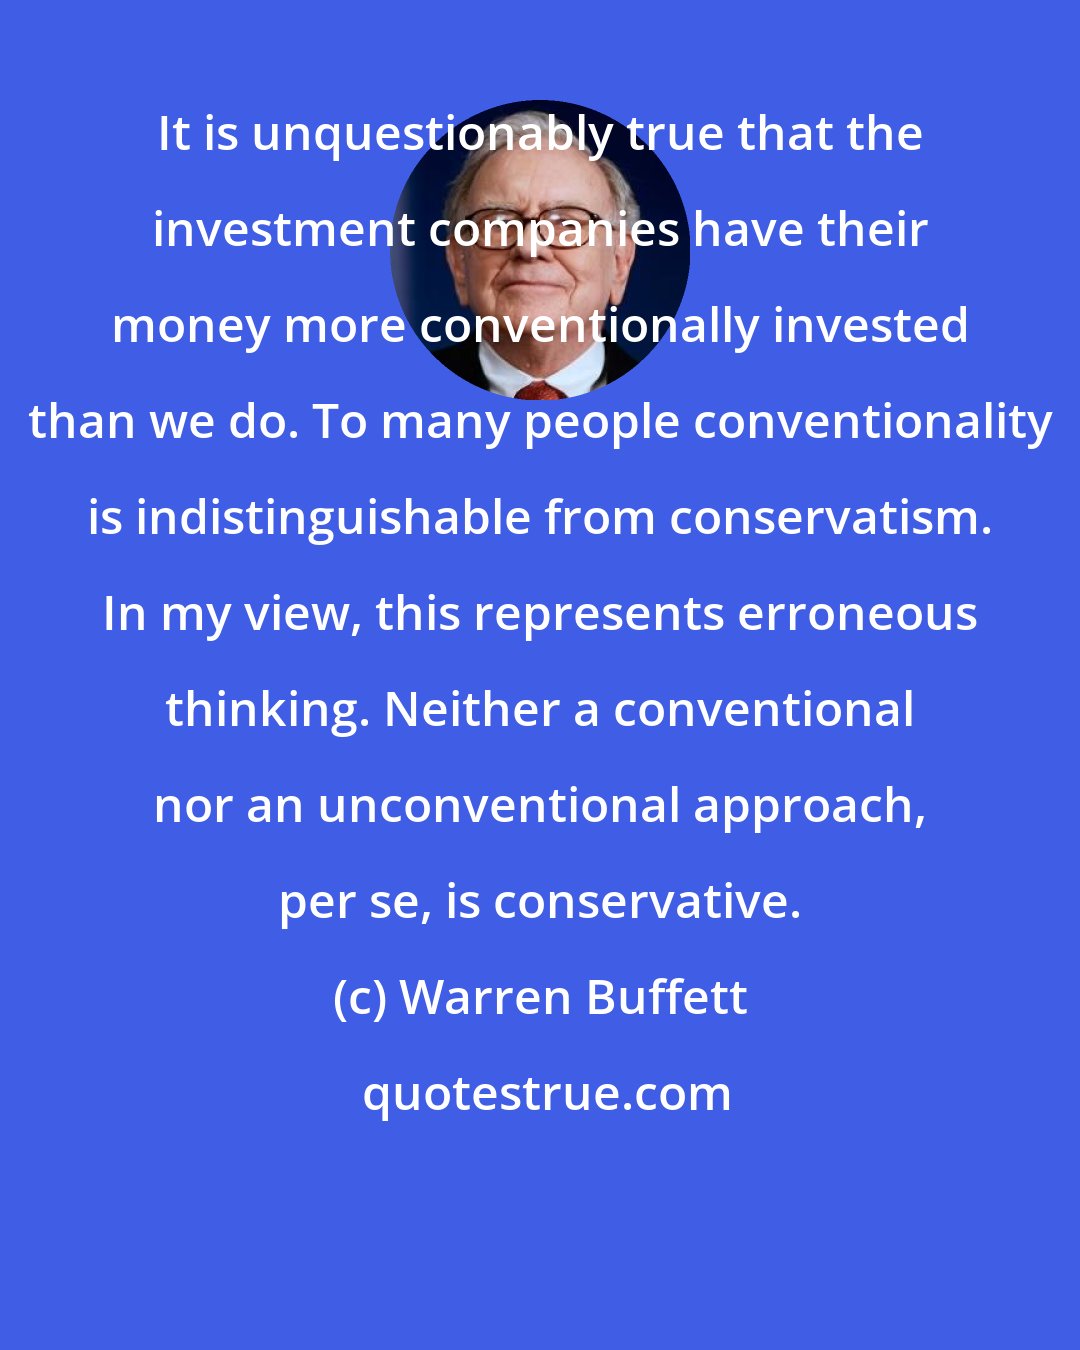 Warren Buffett: It is unquestionably true that the investment companies have their money more conventionally invested than we do. To many people conventionality is indistinguishable from conservatism. In my view, this represents erroneous thinking. Neither a conventional nor an unconventional approach, per se, is conservative.